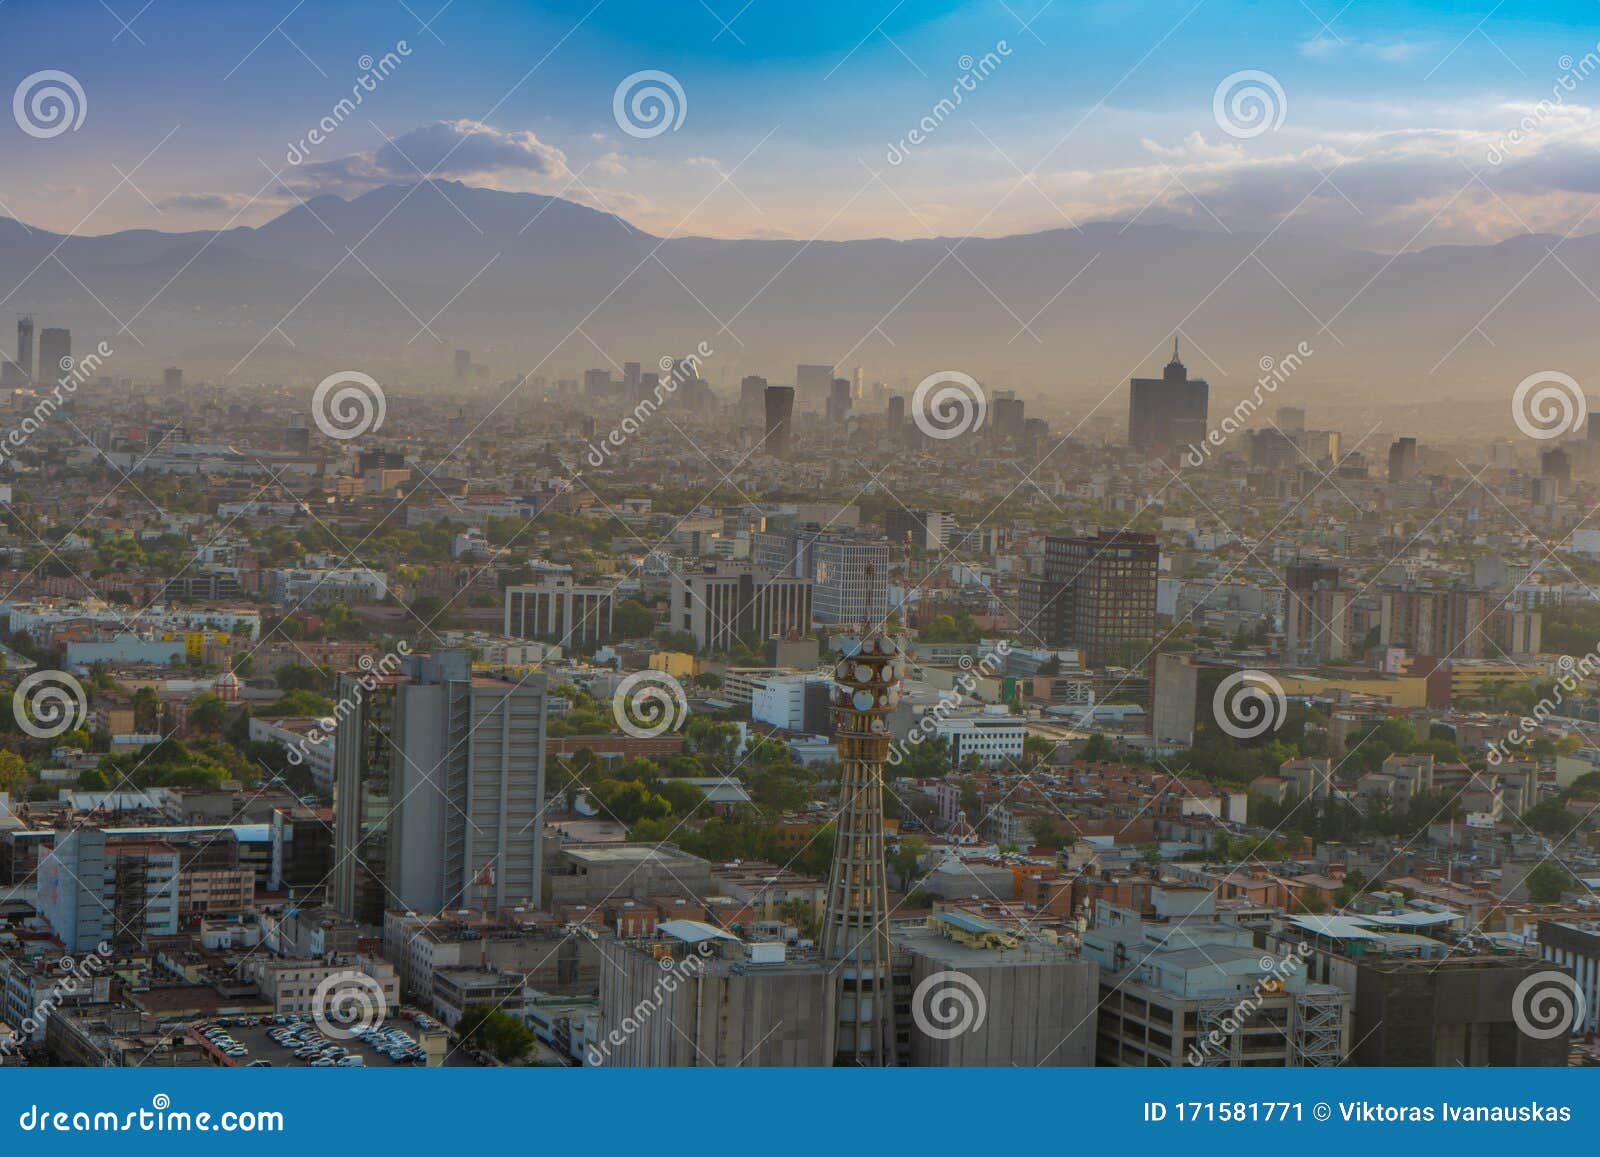 panorama of mexico city central part from skyscraper latino americano. view with buildings. travel photo, background, wallpaper